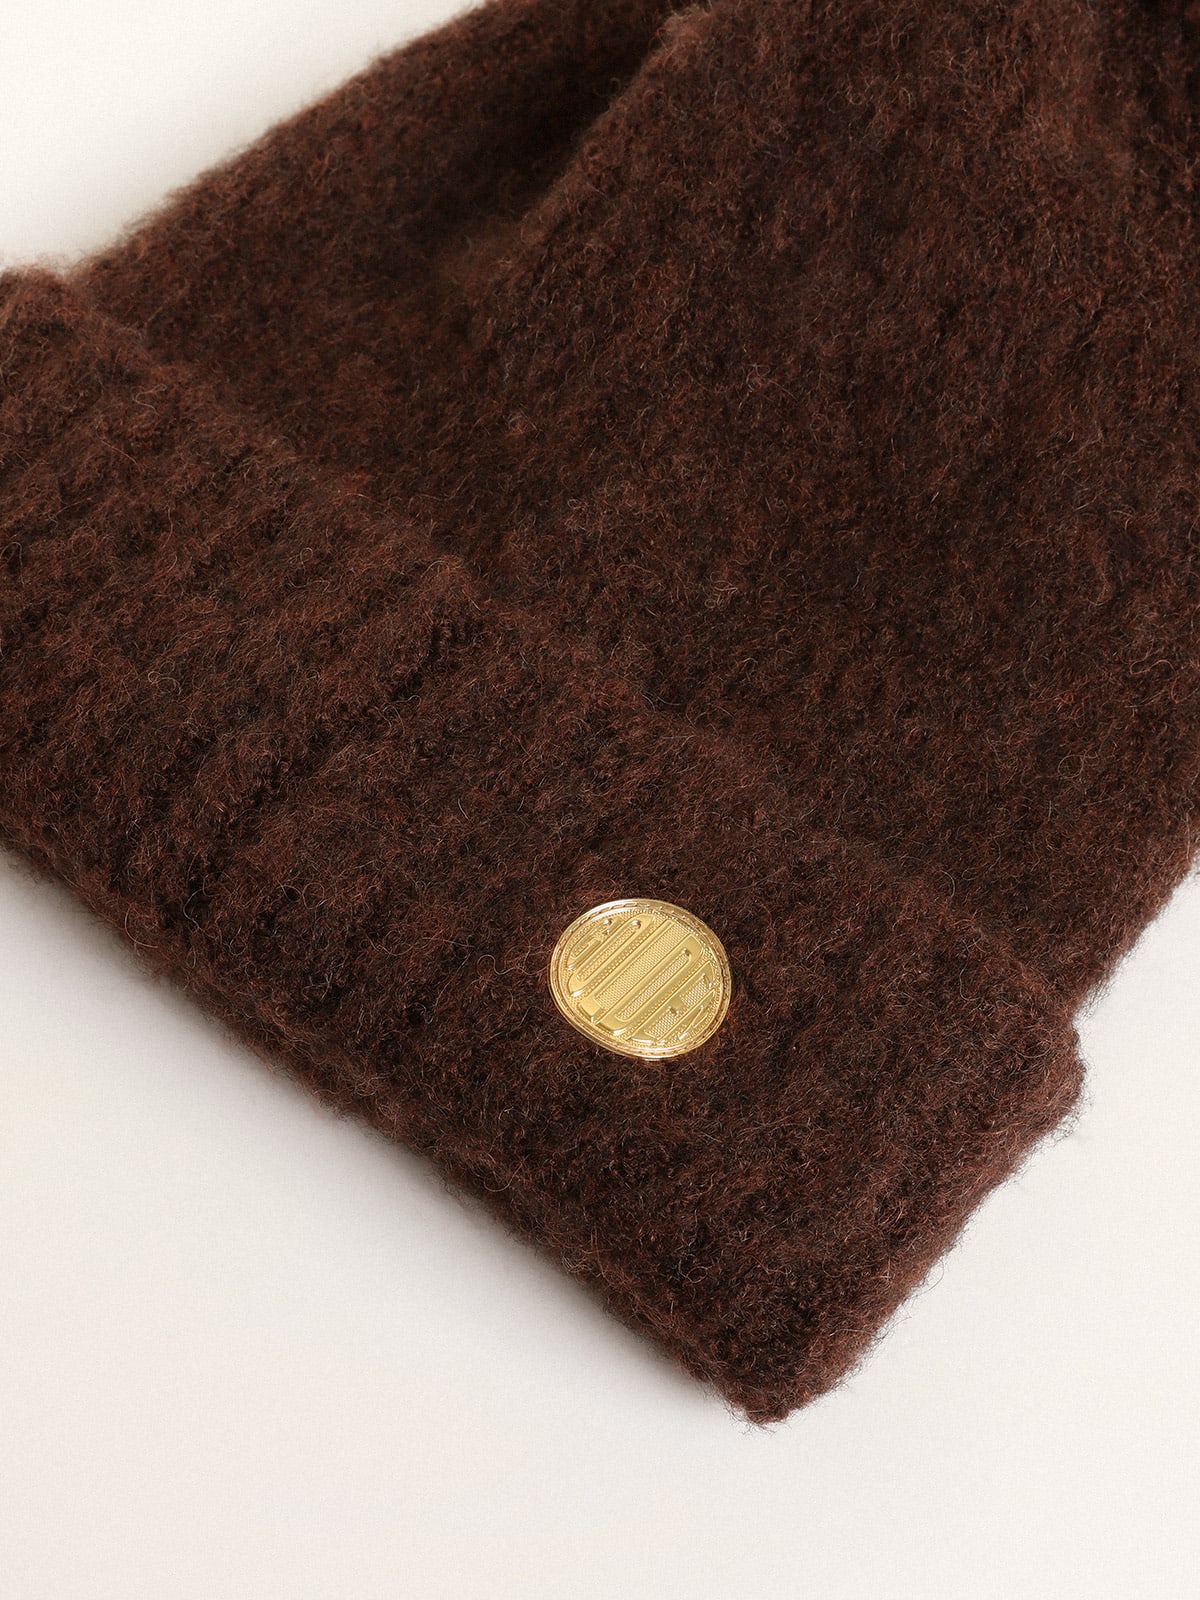 Golden Goose - Coffee-colored wool beanie with pompom in 